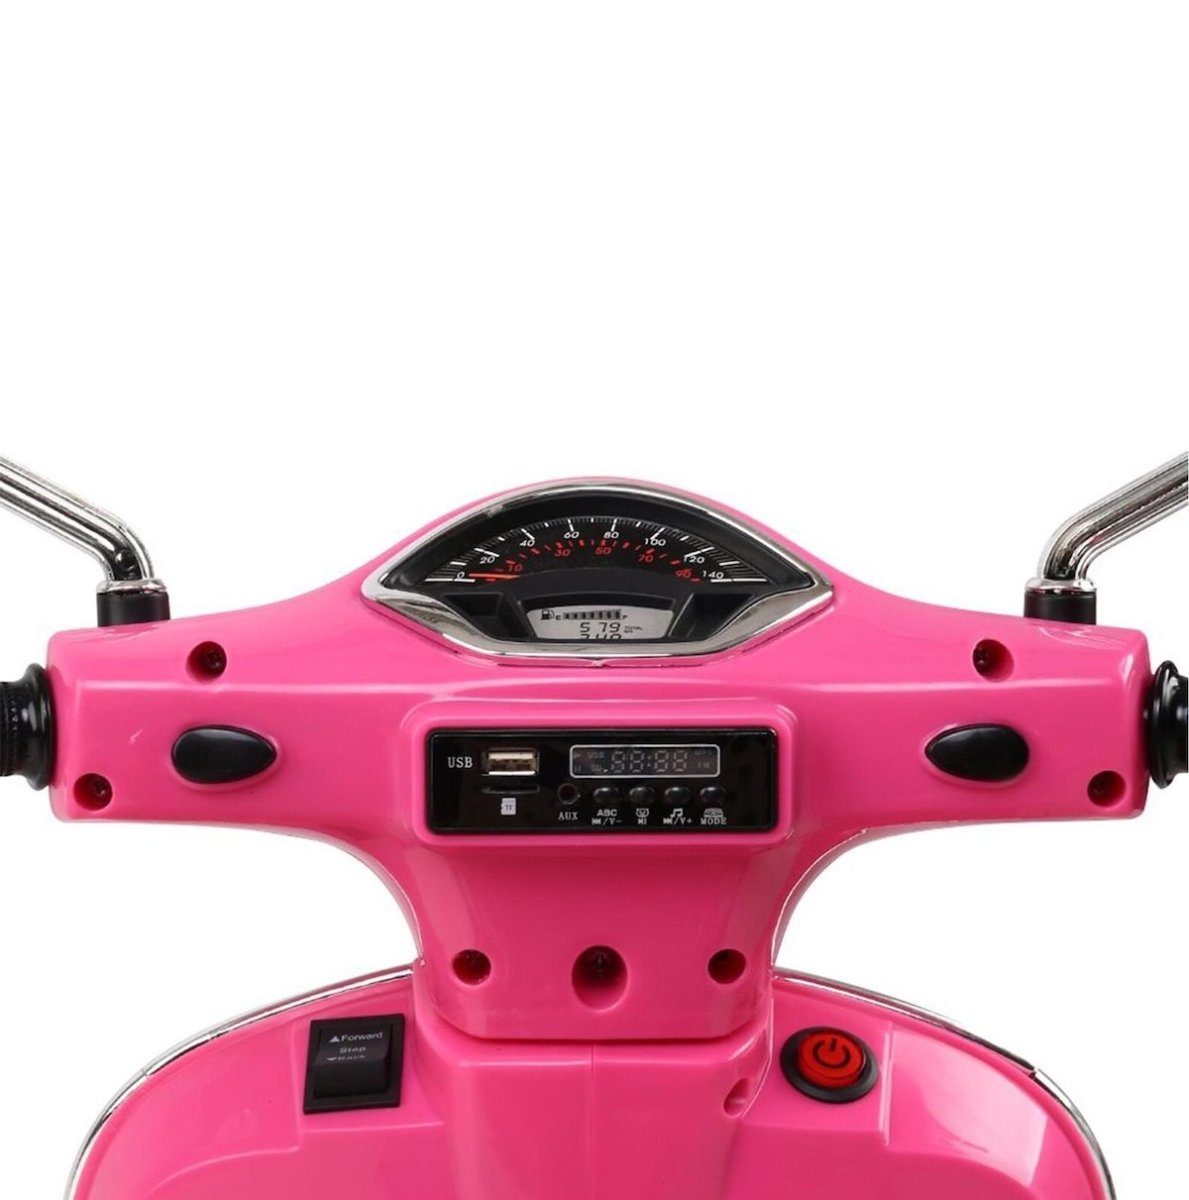 Vespa GTS Electric Ride On Scooter - Pink